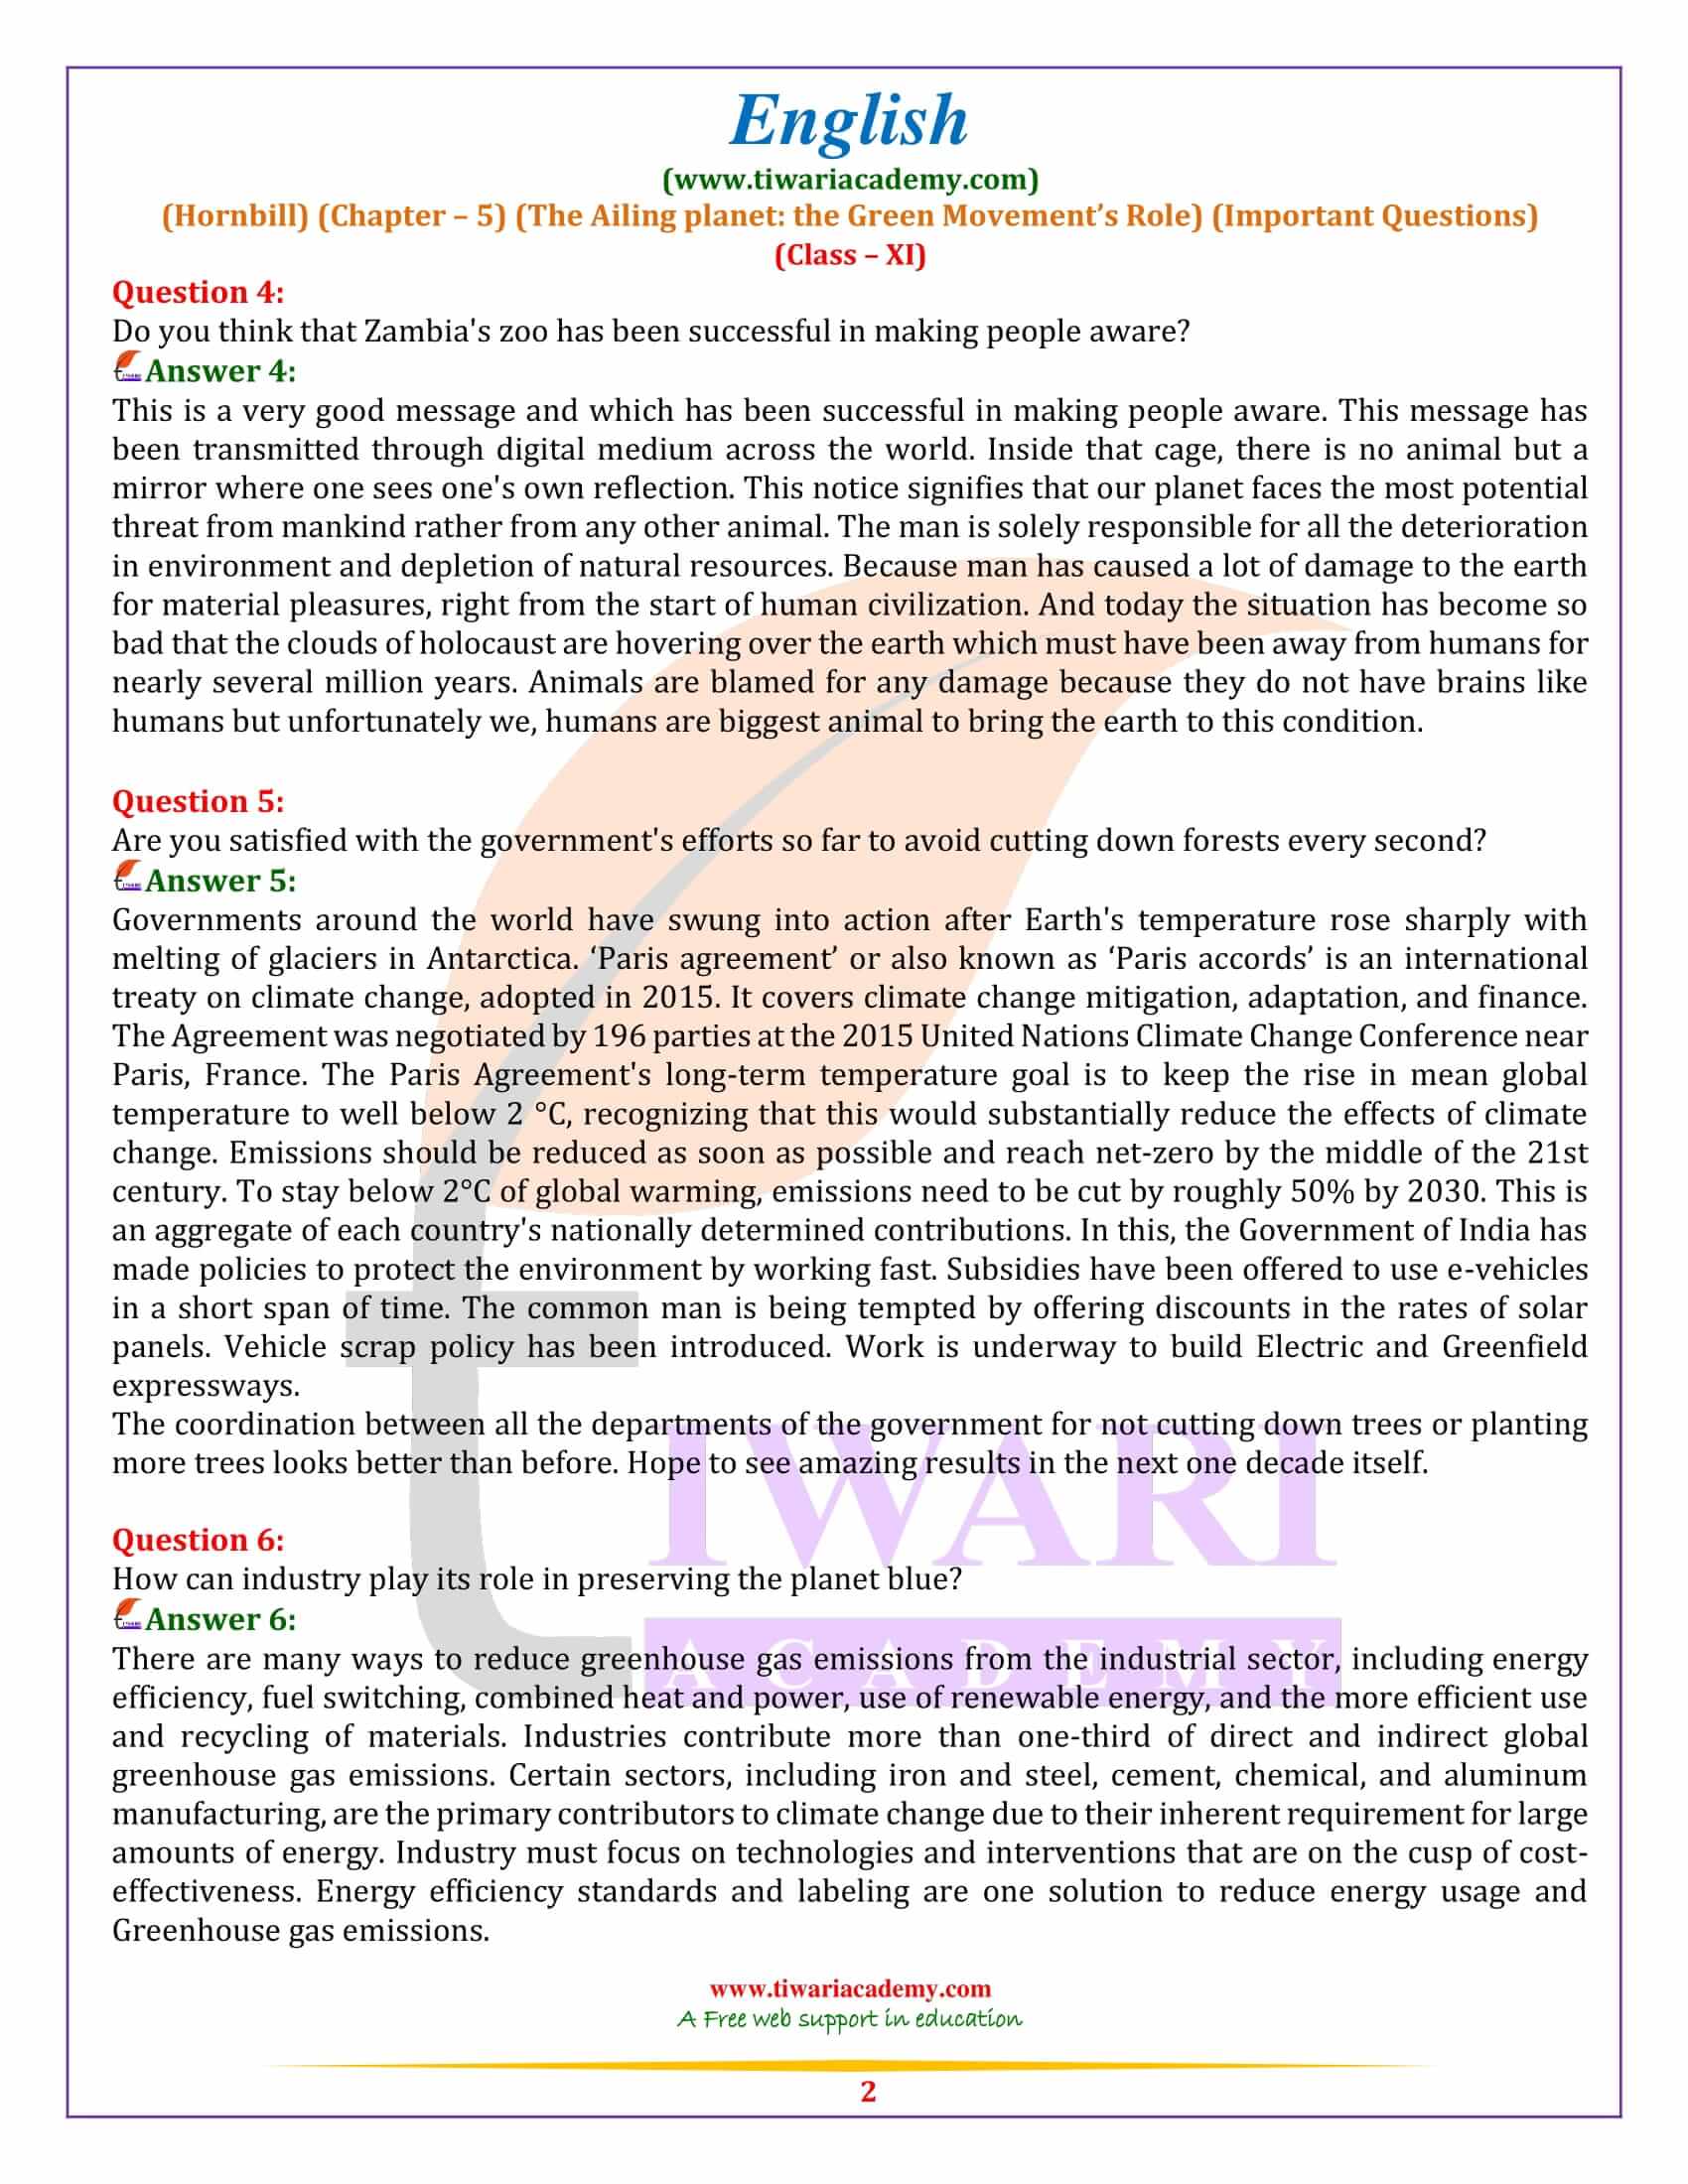 Class 11 English Hornbill Chapter 5 Revision Questions